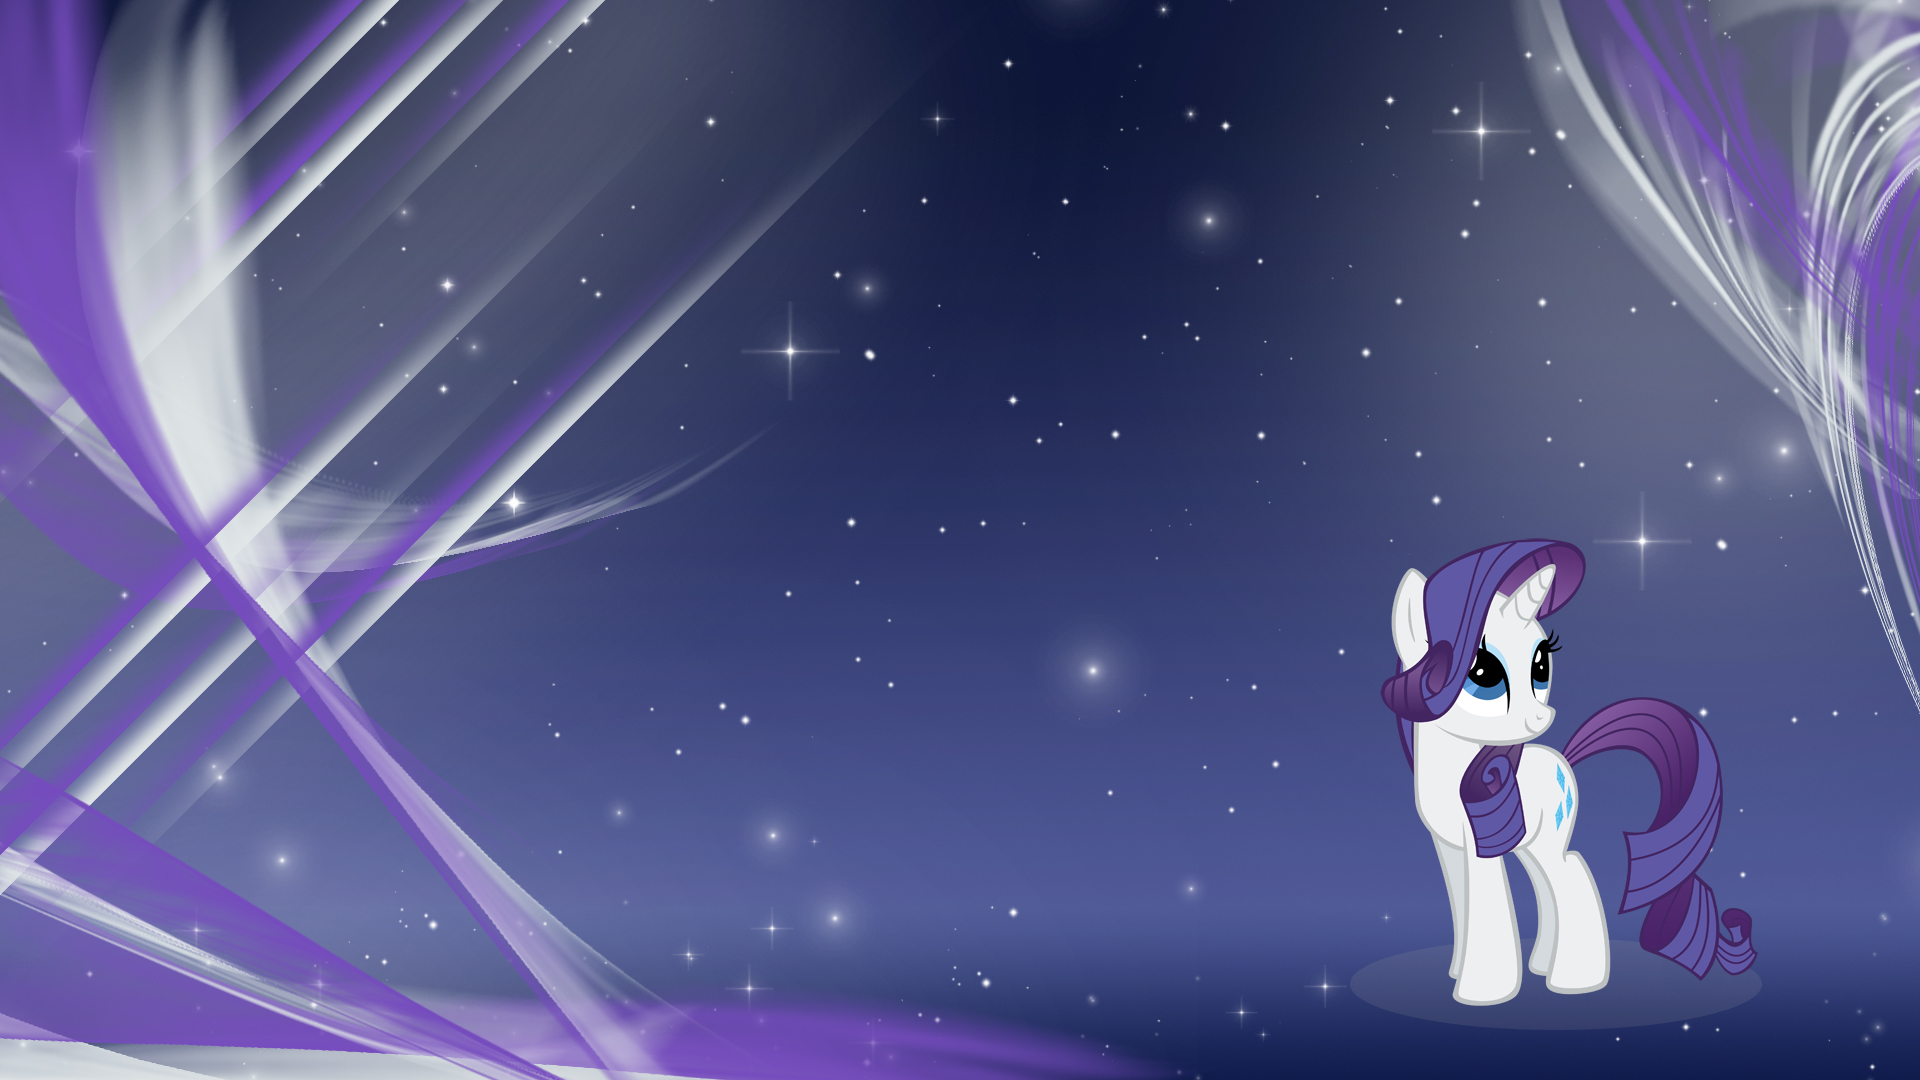 MLP: FiM - Rarity V2 by The-Smiling-Pony and Unfiltered-N